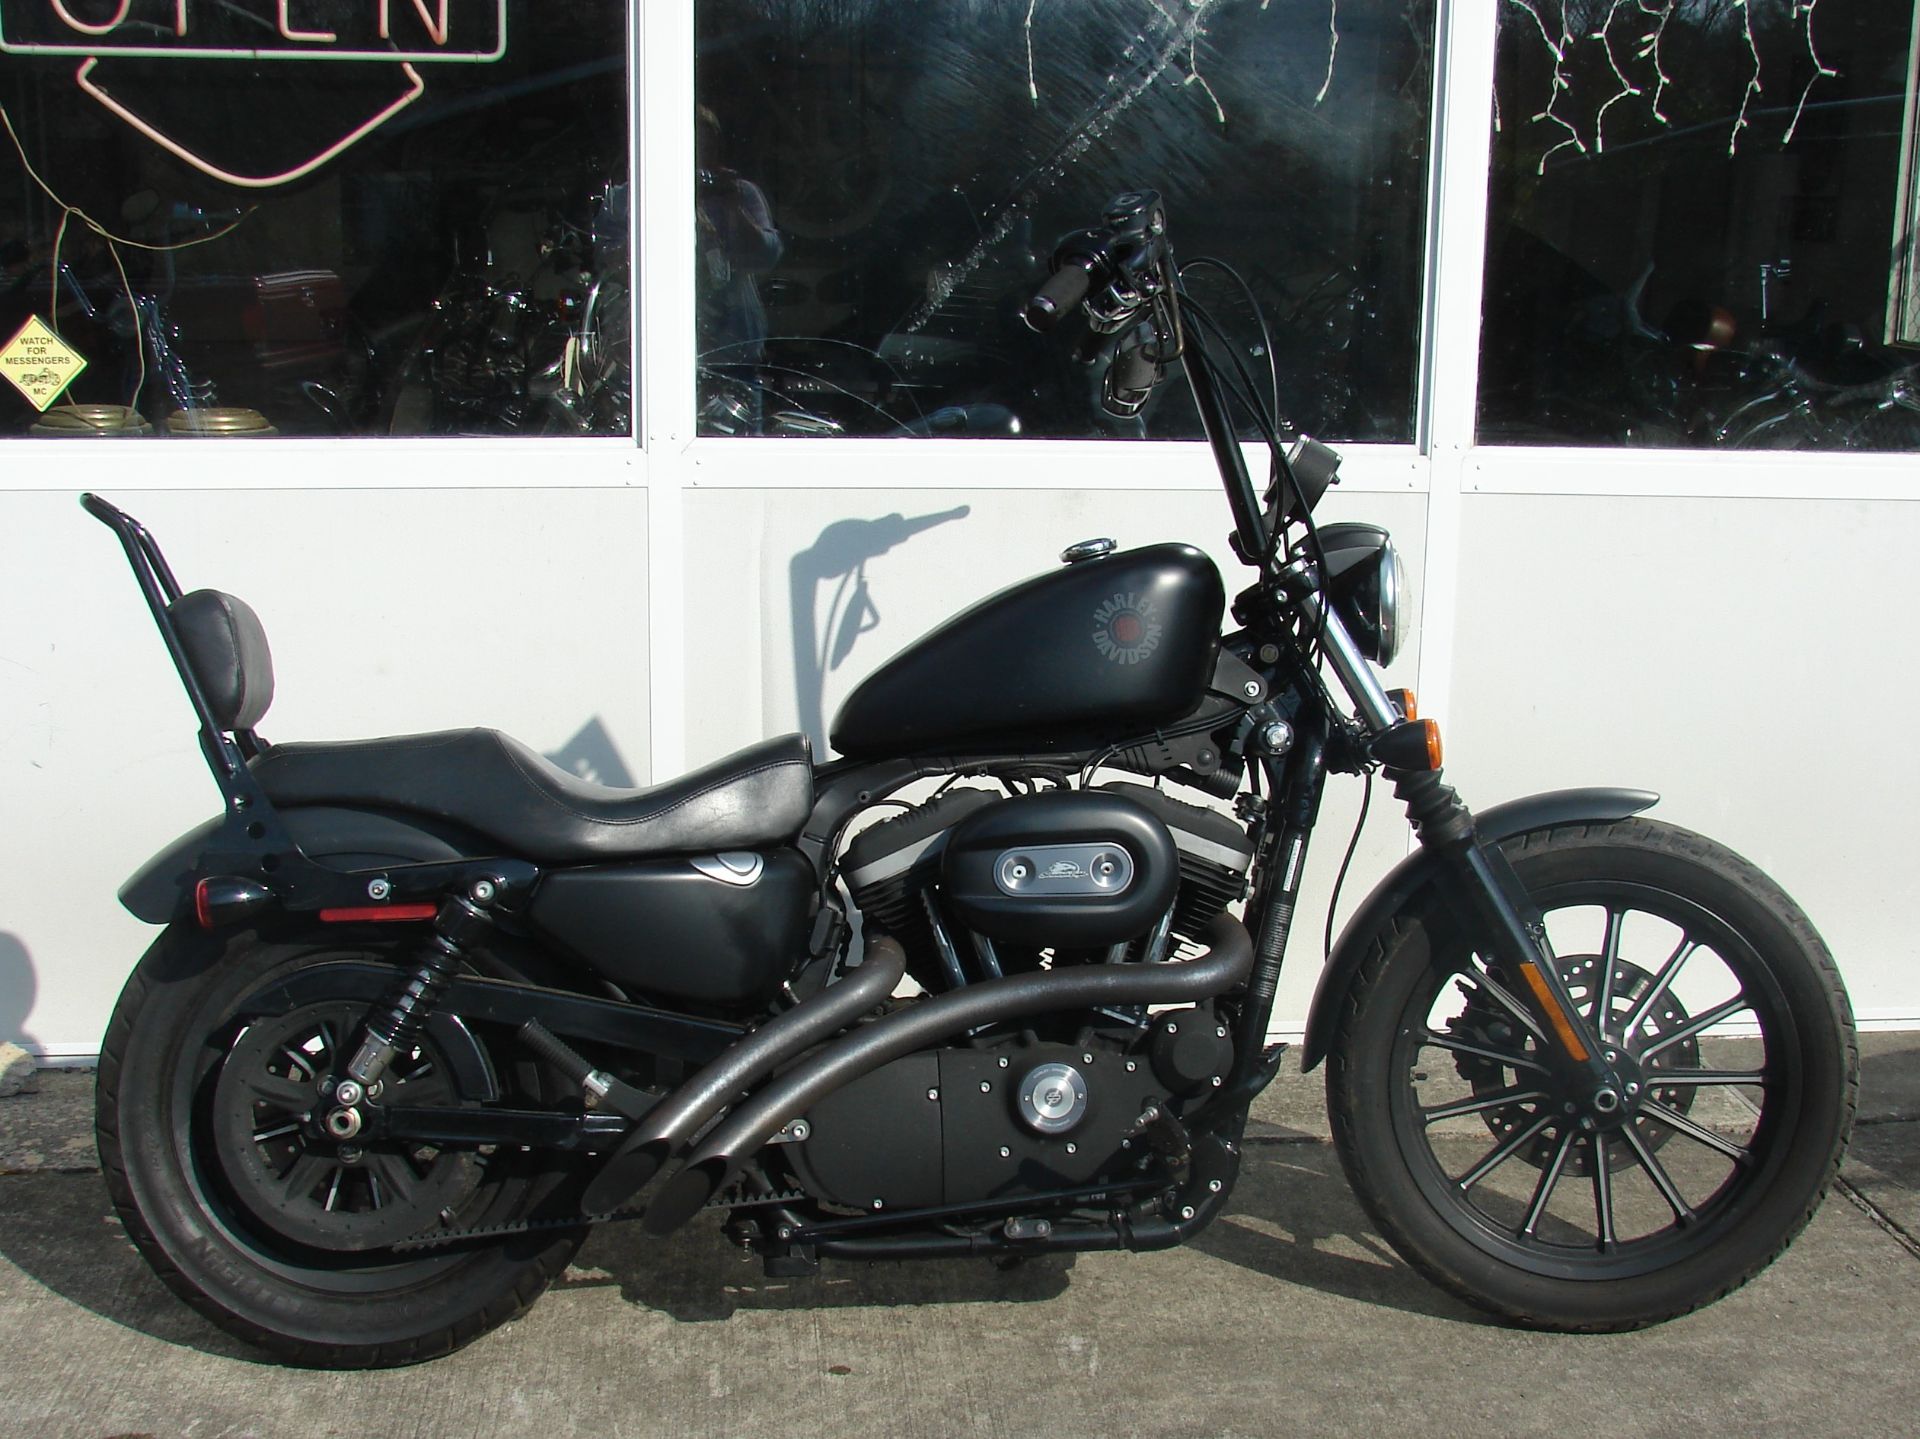 2010 Harley-Davidson XL 883N Iron LE Sportster in Williamstown, New Jersey - Photo 10